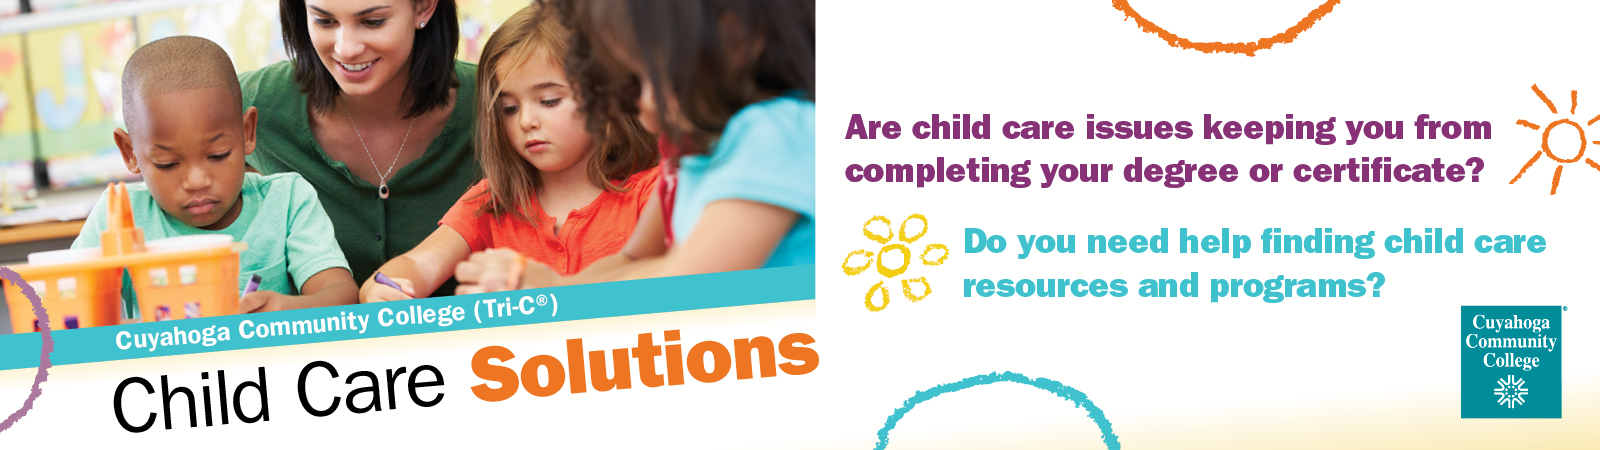 Child Care Solution Are child care issues keeping you from completing your degree or certificate?  Do you need help finding child care resources and programs?